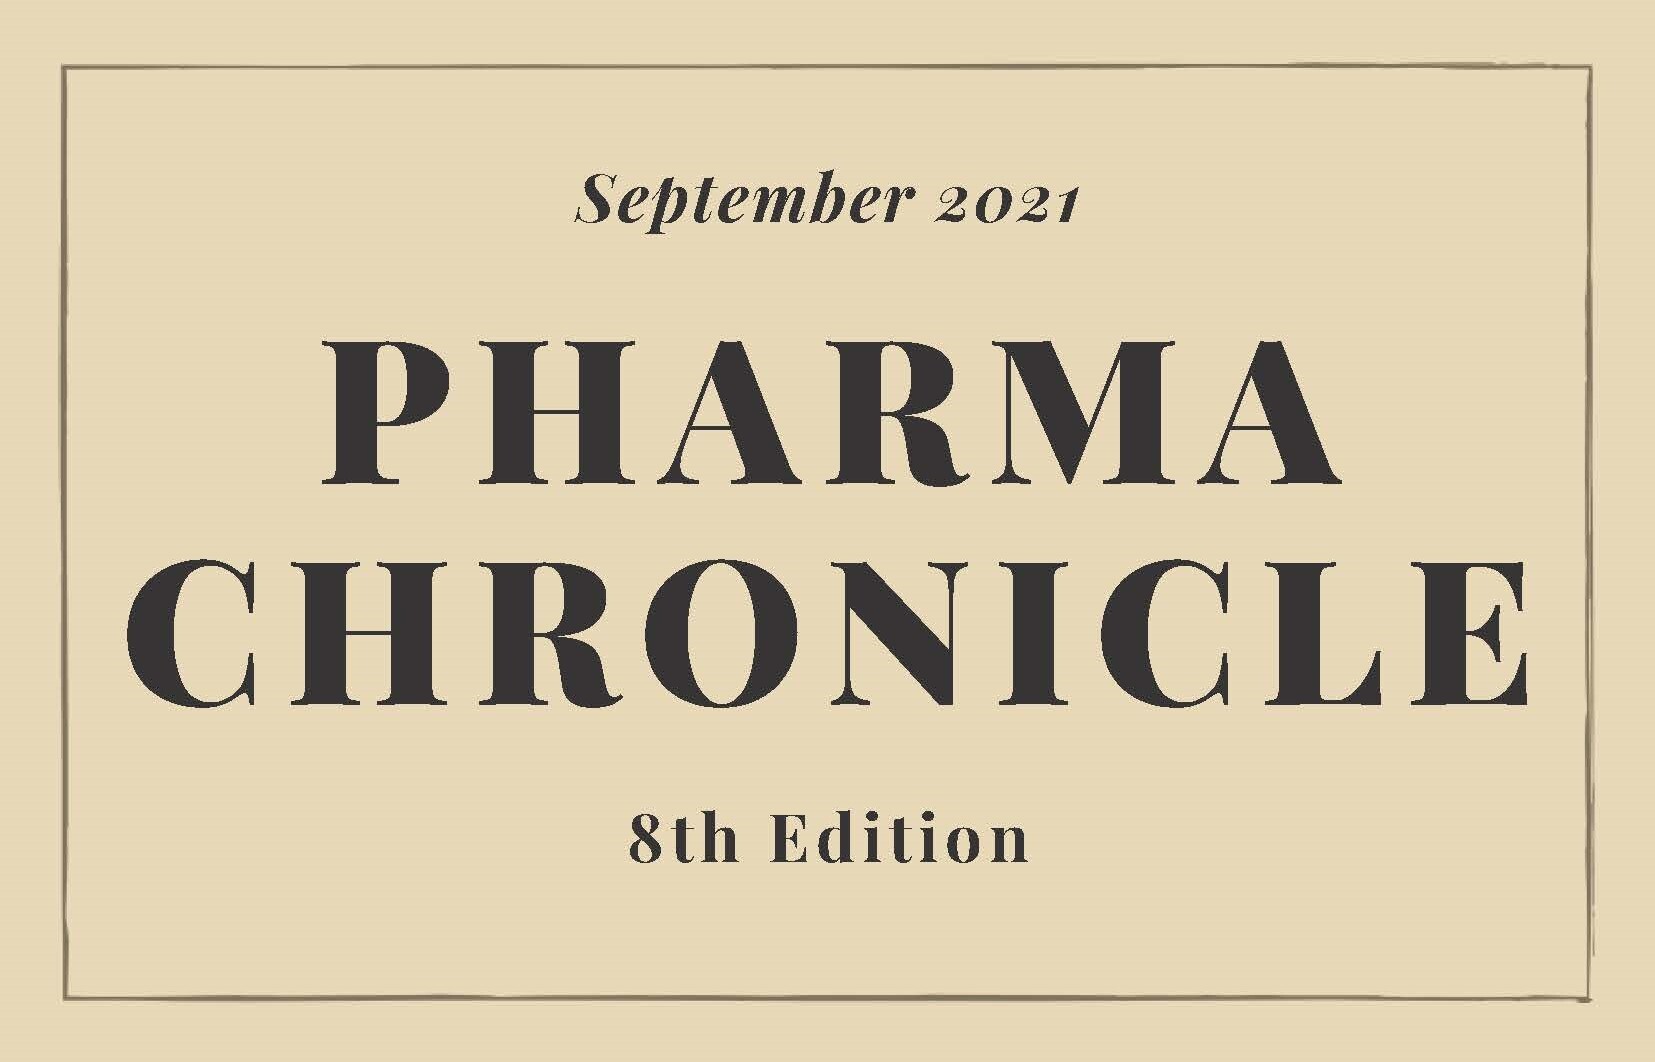 PharmaChronicle Issue 8 cropped